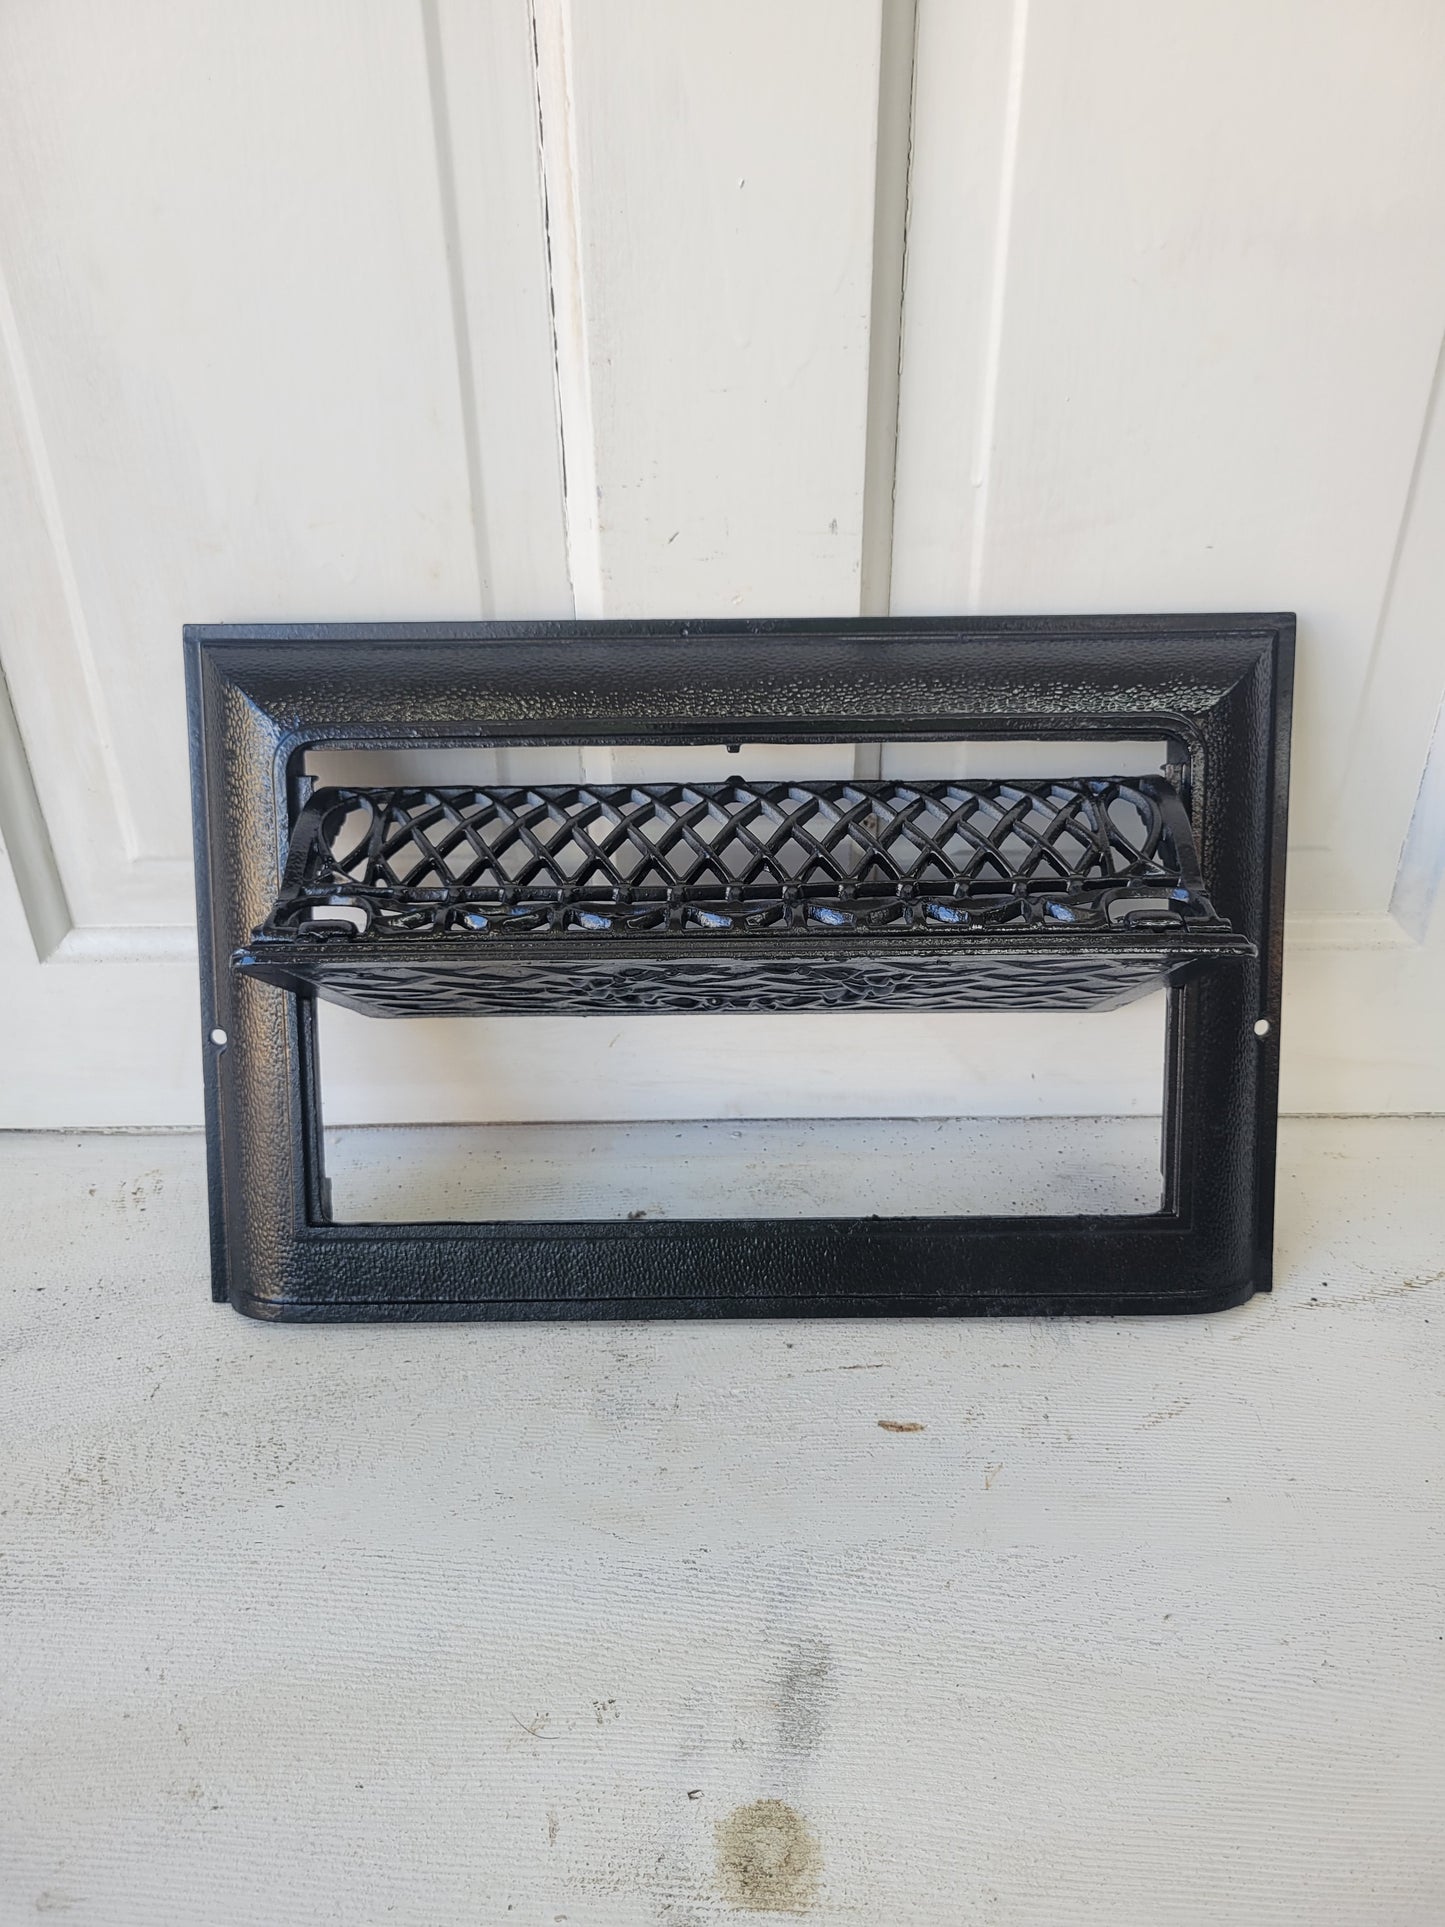 10 x 16 Fancy Cast Iron Fold Out Vent Cover, Antique Floor Register Cover with Dampers #072907